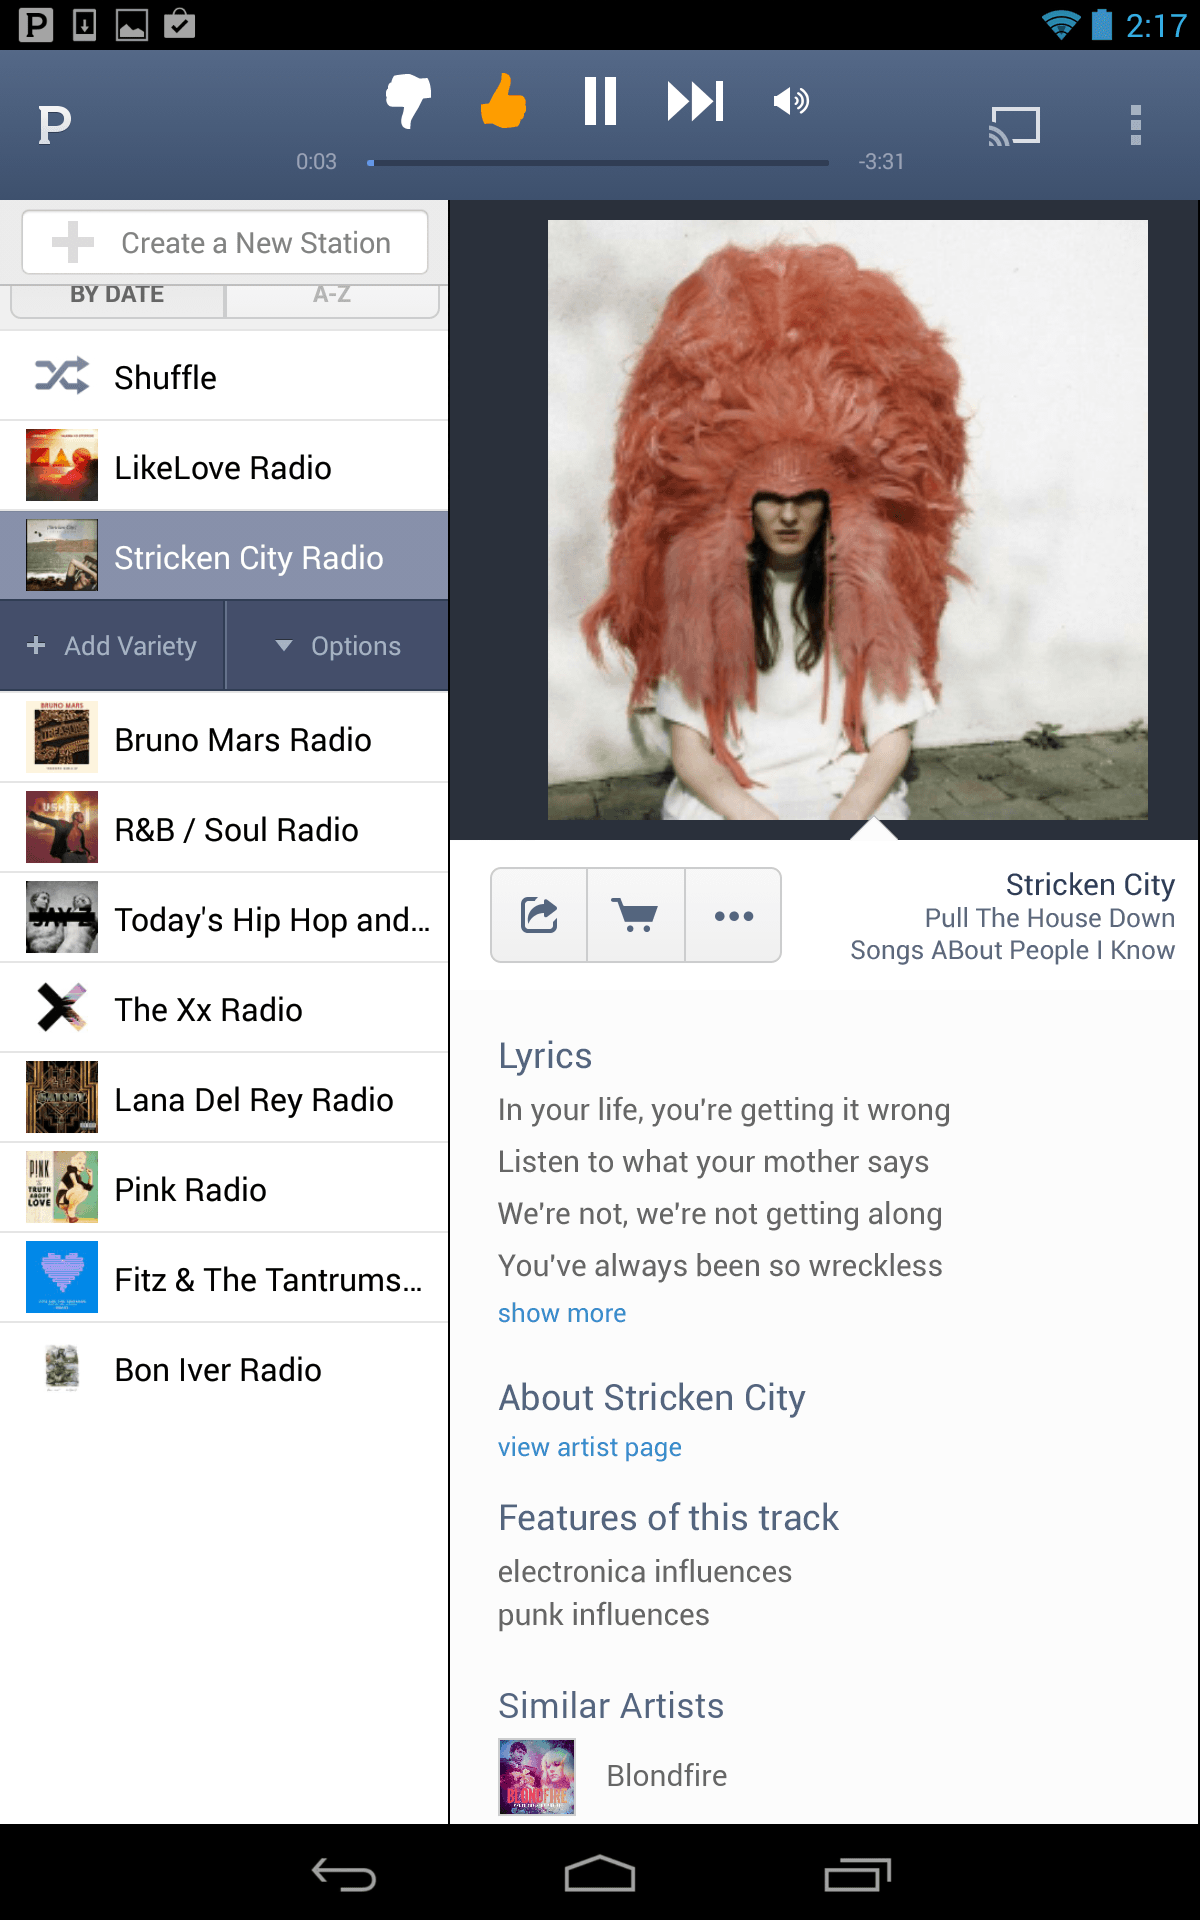 pandora app for android phone